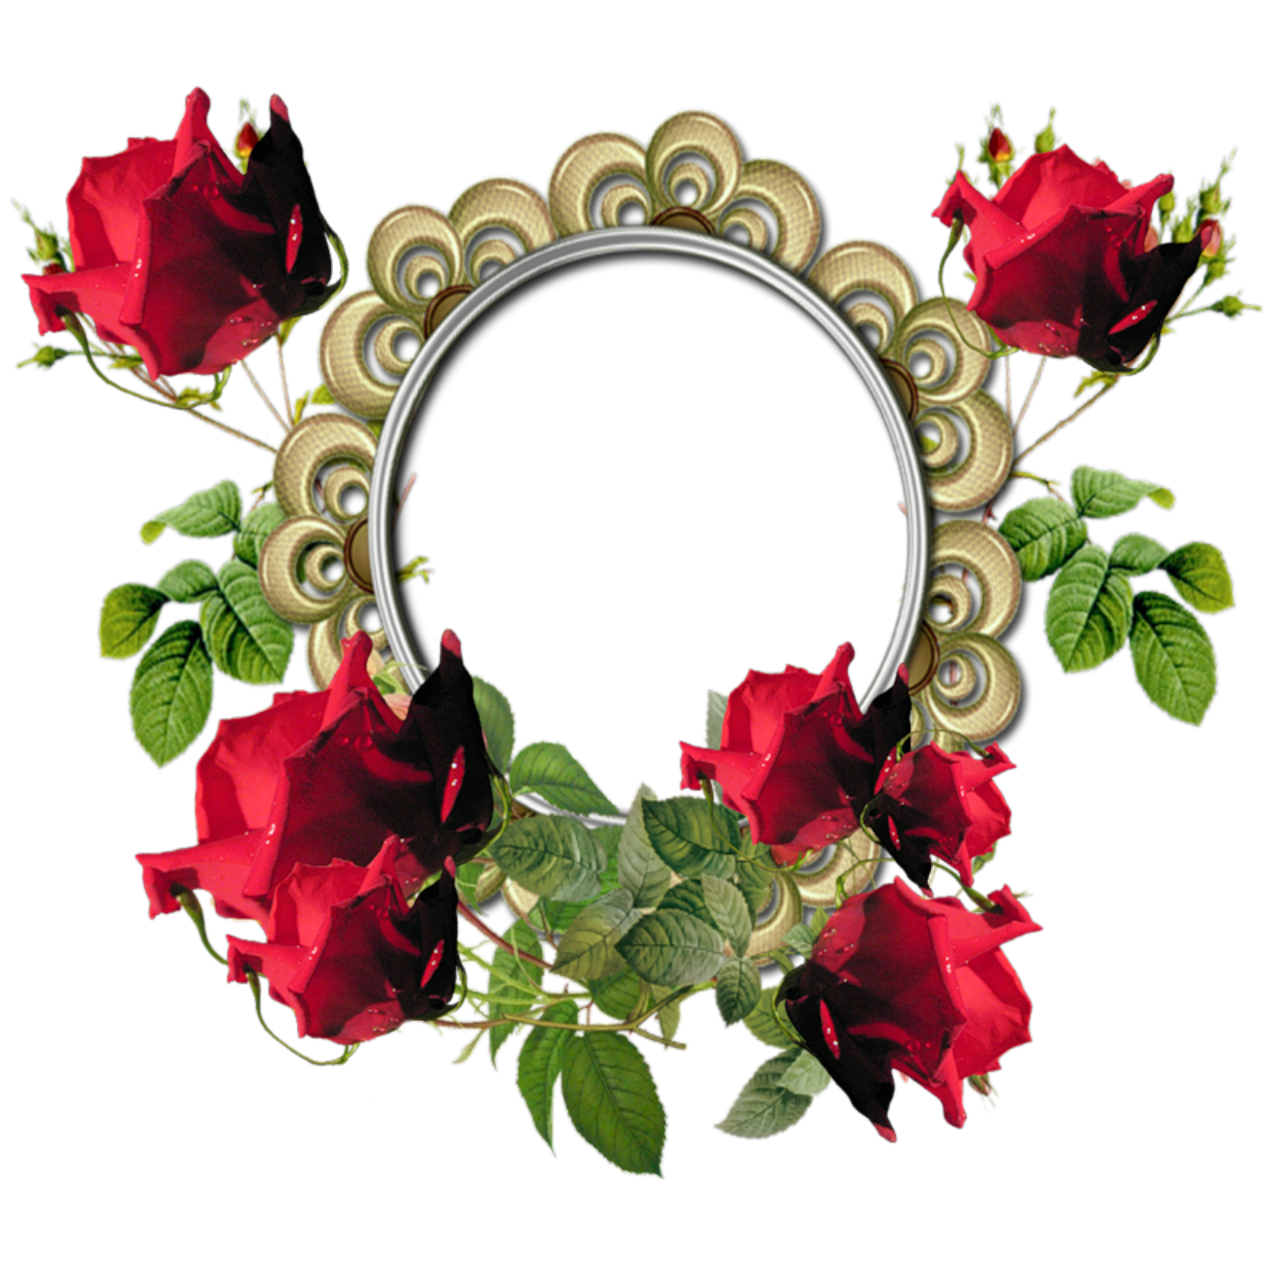 Rose Frame Clipart | Free download on ClipArtMag